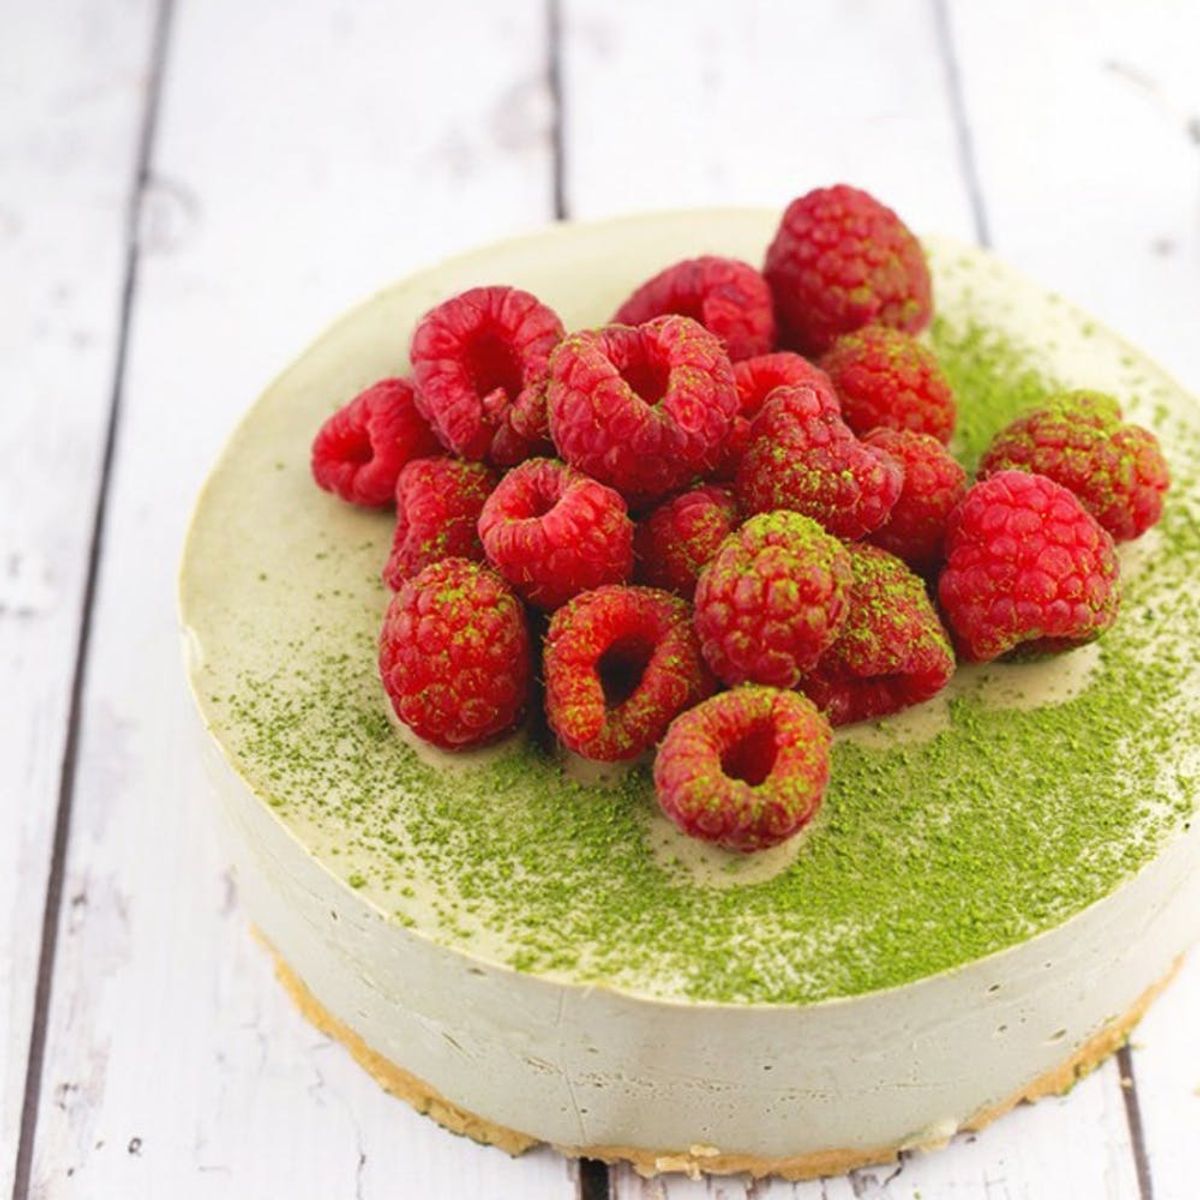 The Most Saved Matcha Recipes on Pinterest